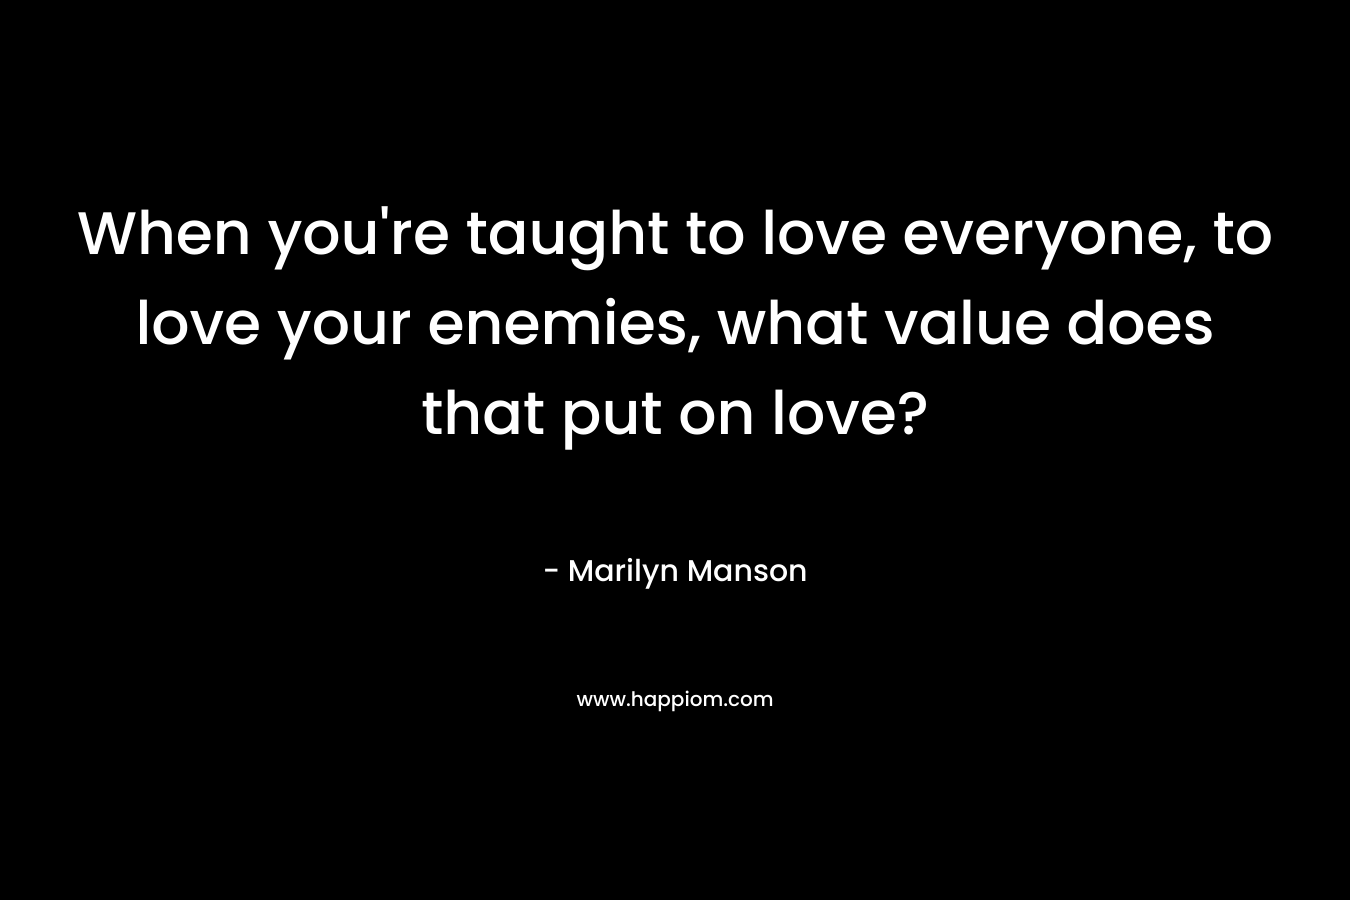 When you’re taught to love everyone, to love your enemies, what value does that put on love? – Marilyn Manson